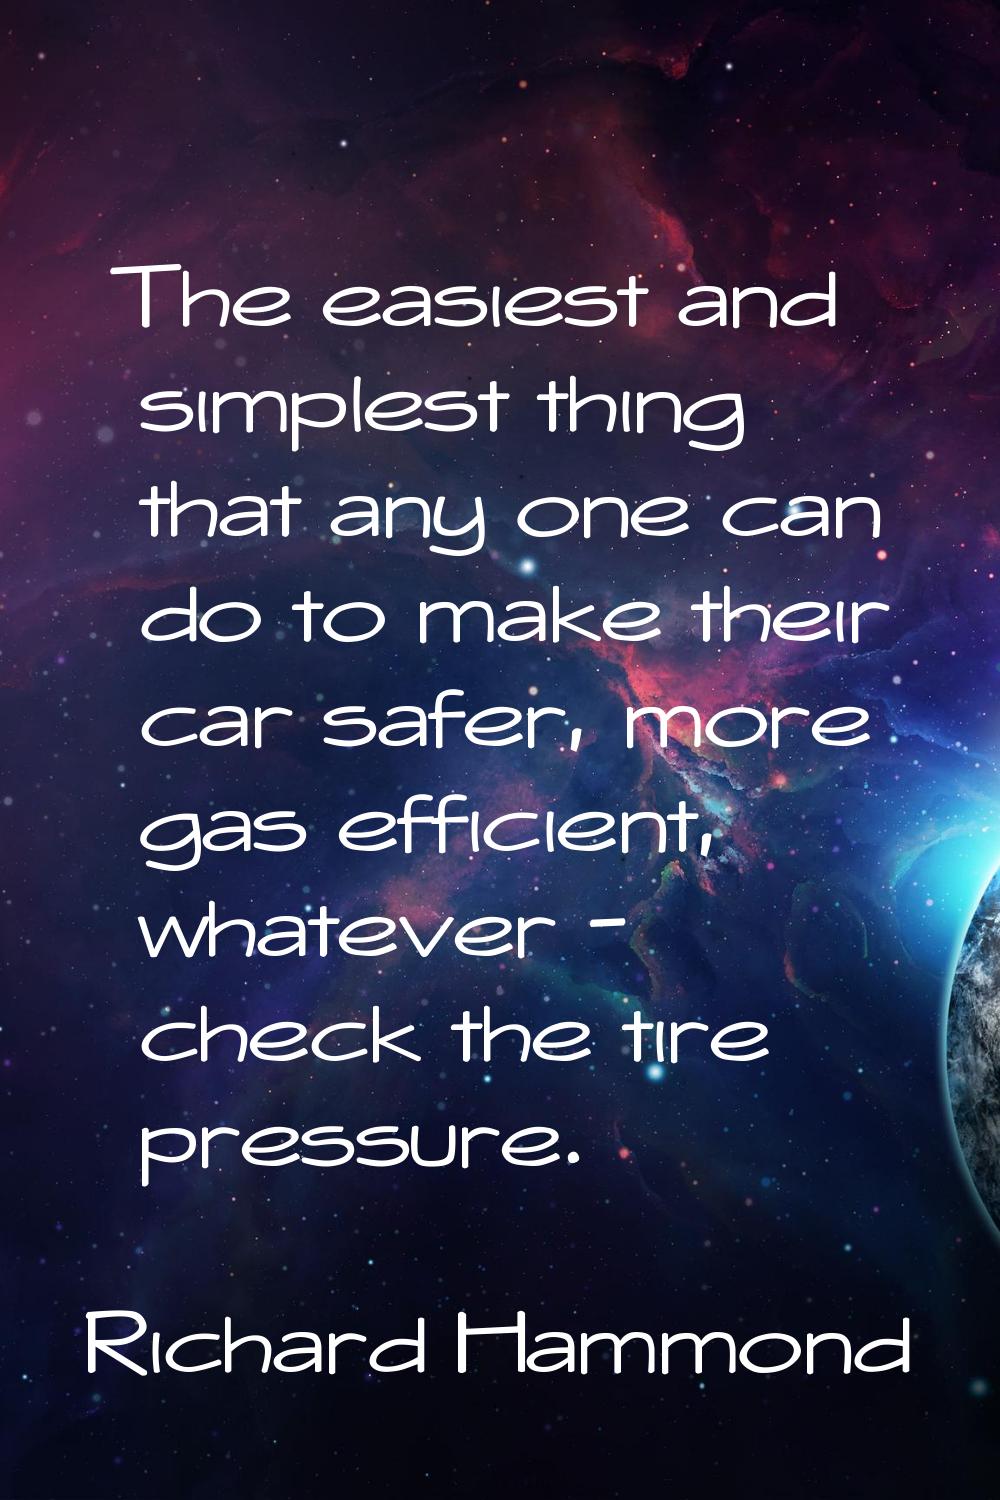 The easiest and simplest thing that any one can do to make their car safer, more gas efficient, wha